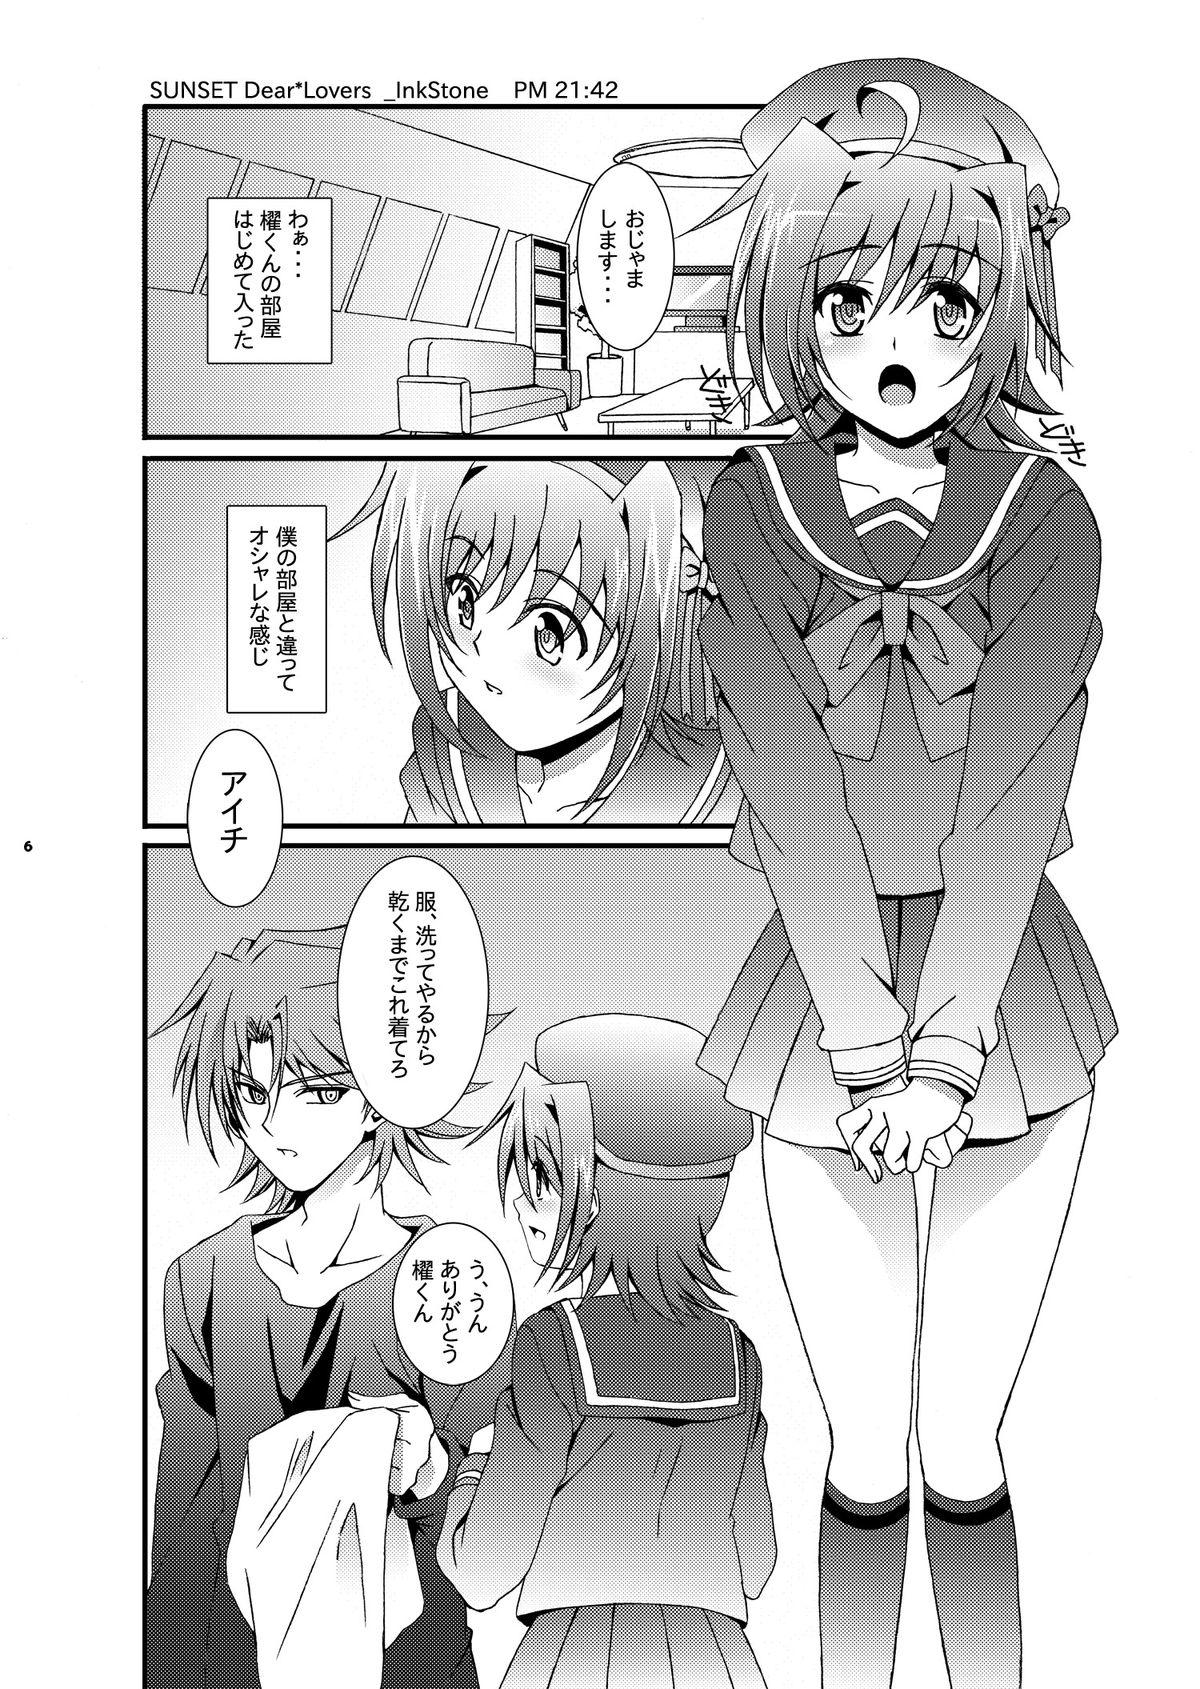 Gay Shop SUNSET Dear Lovers - Cardfight vanguard Pervs - Page 7